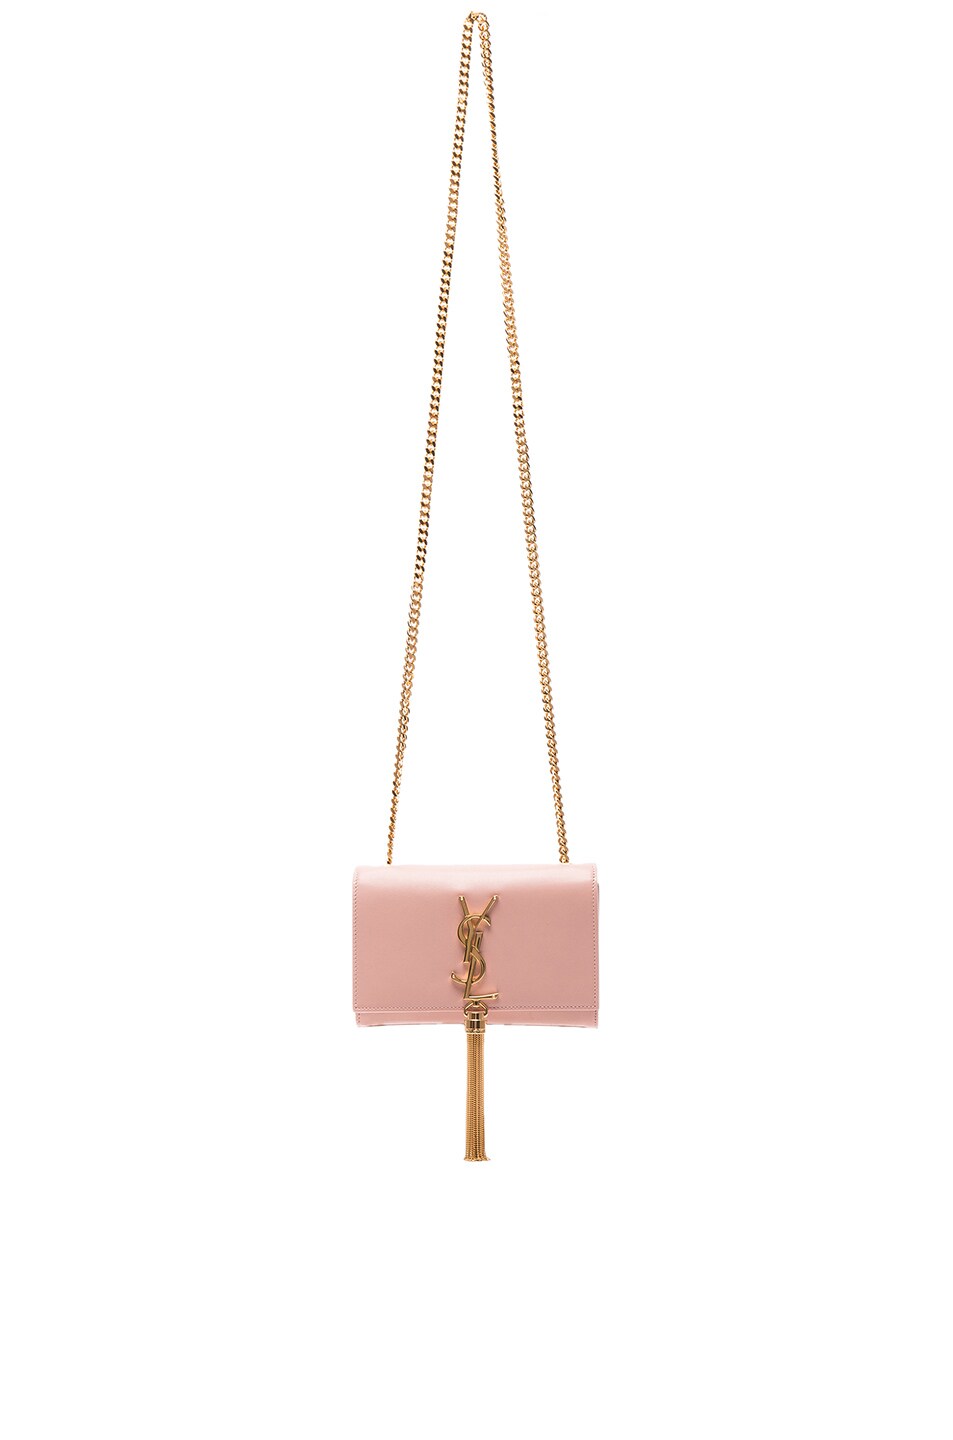 Image 1 of Saint Laurent Small Monogramme Tassel Chain Bag in Pale Blush